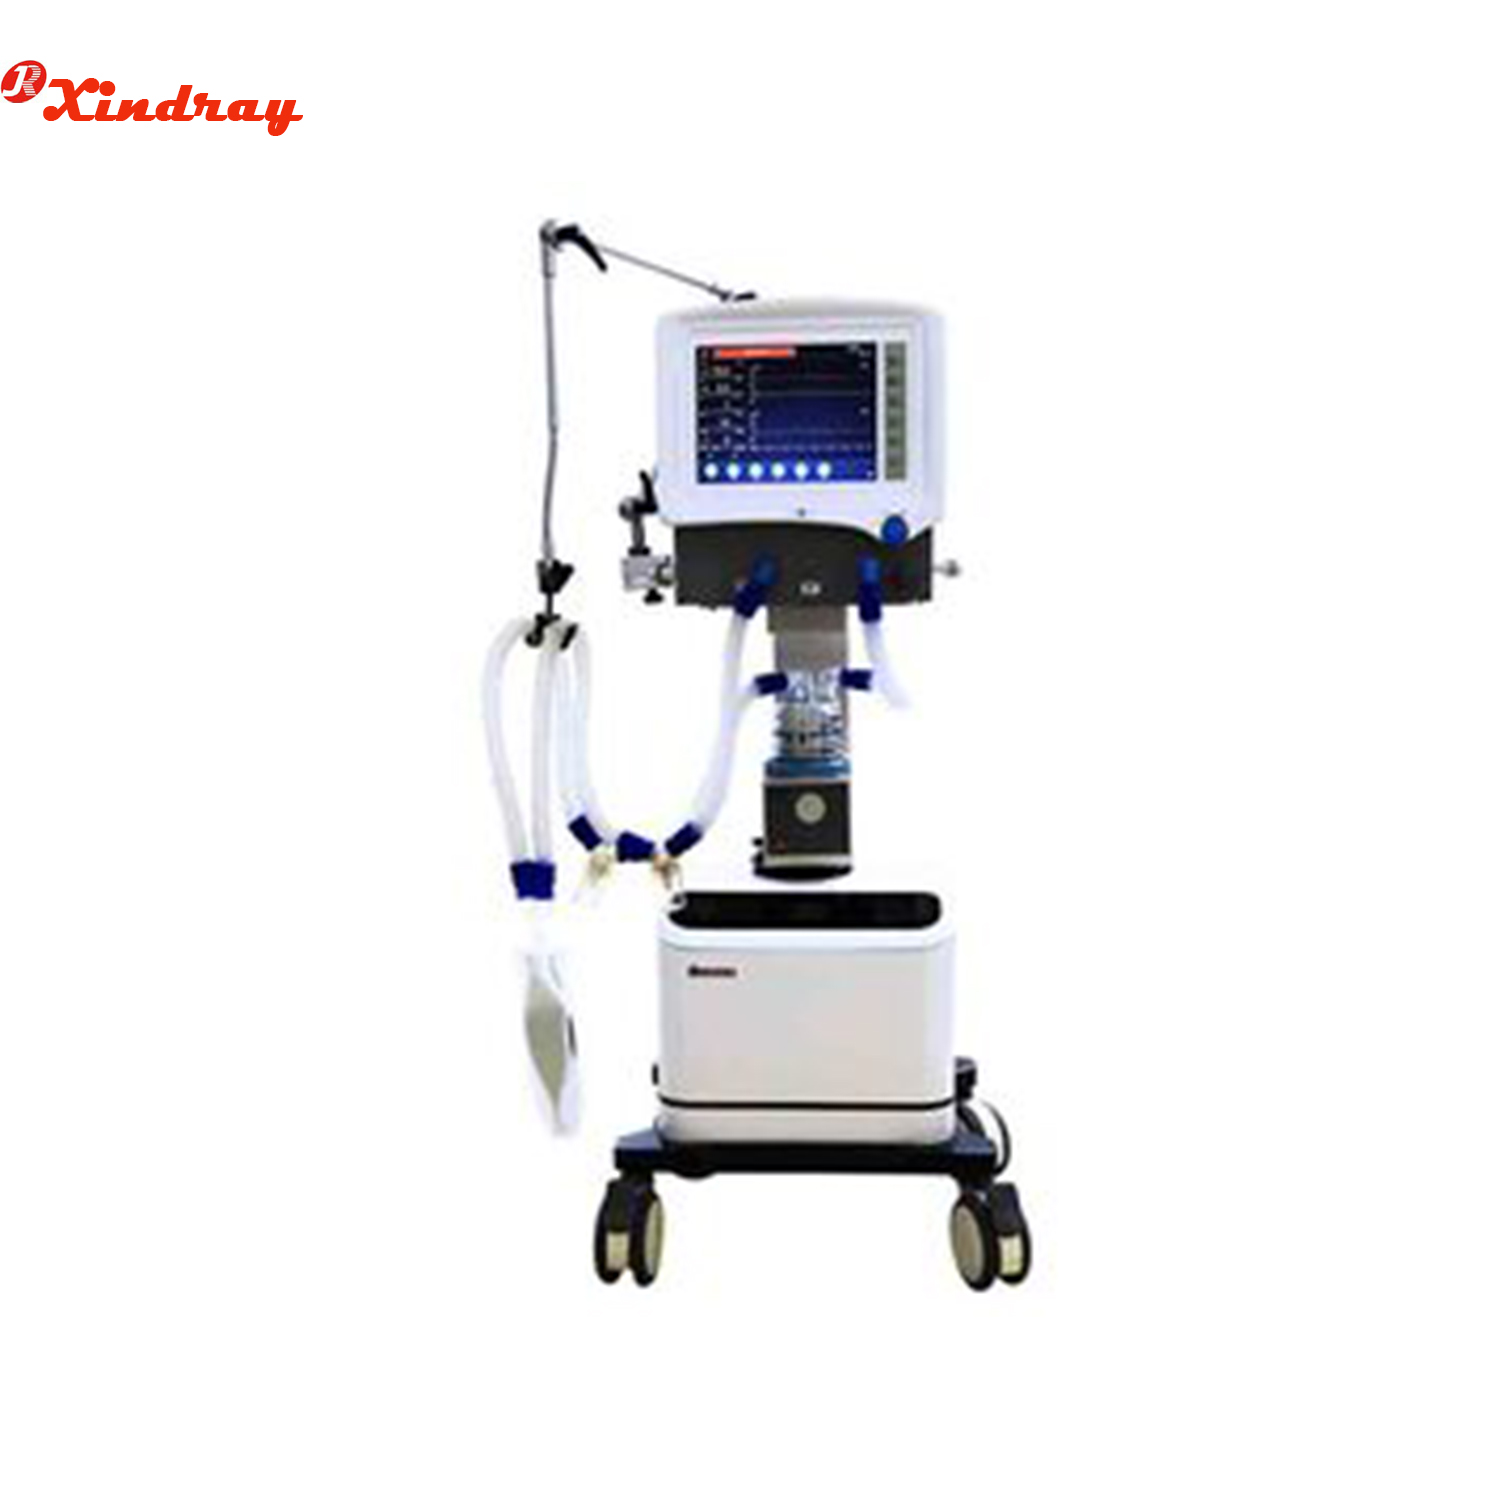  Mobile Trolley Breathing Machine ICU Ventilator Machine for Human or Infant Use